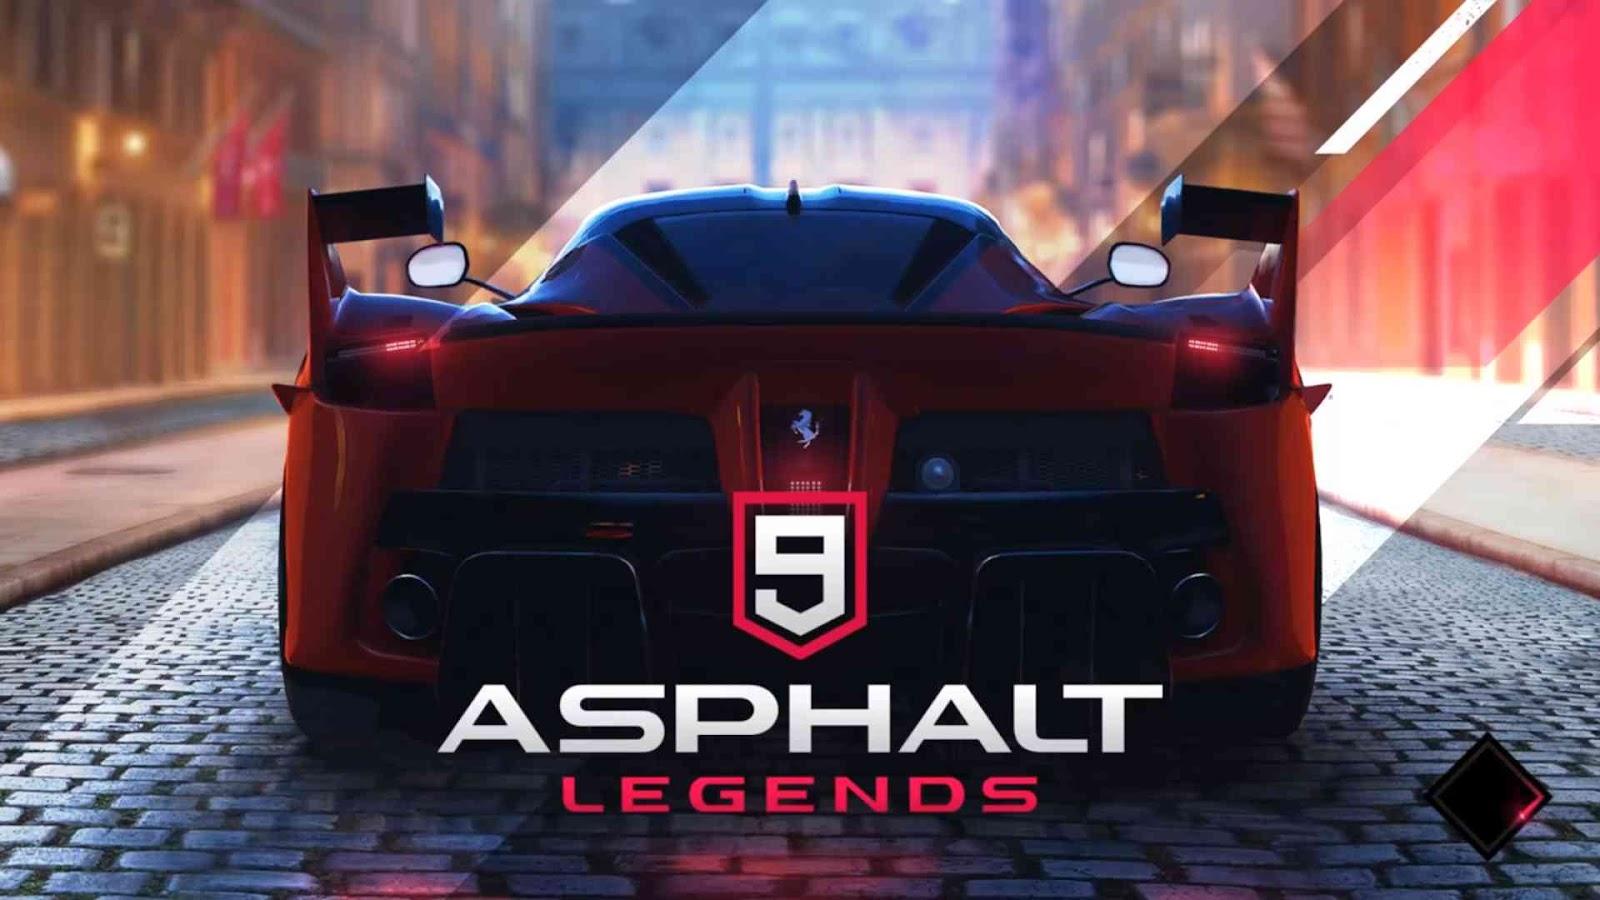 Asphalt 9 MOD APK FAQS - Most commonly Asked Questions